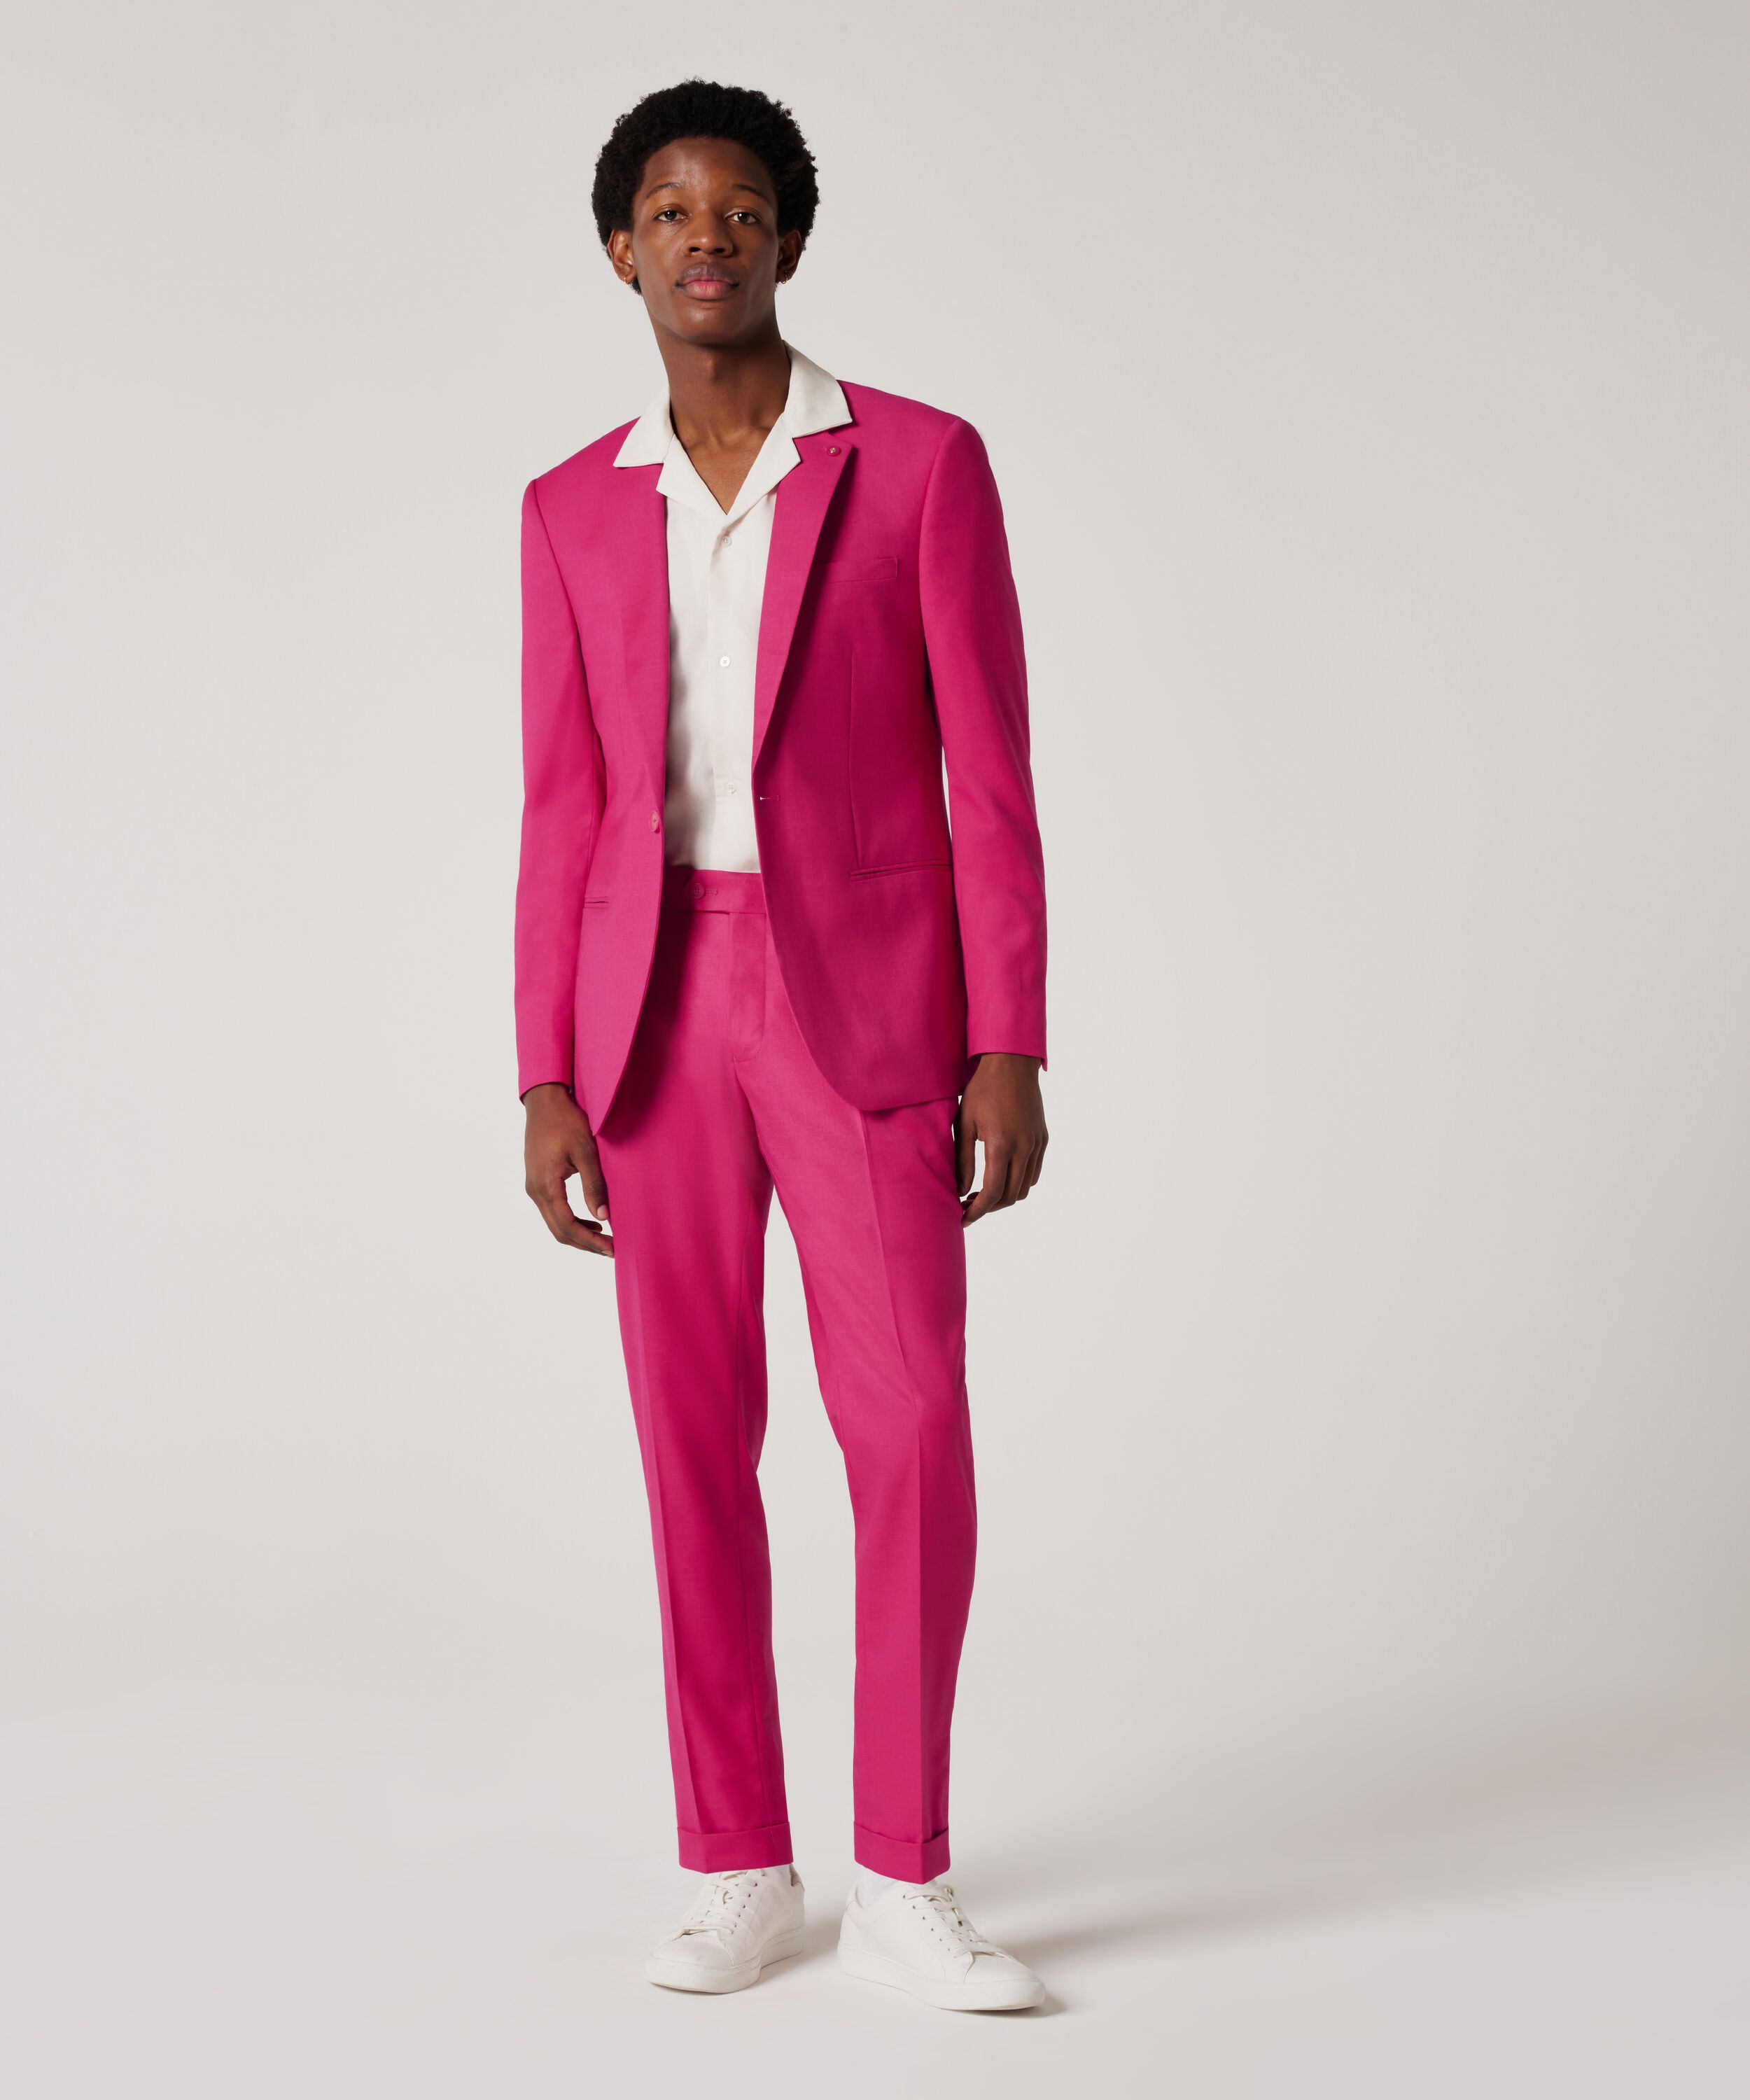 Slim Stretch Tailored Jacket - Pink, Suit Jackets